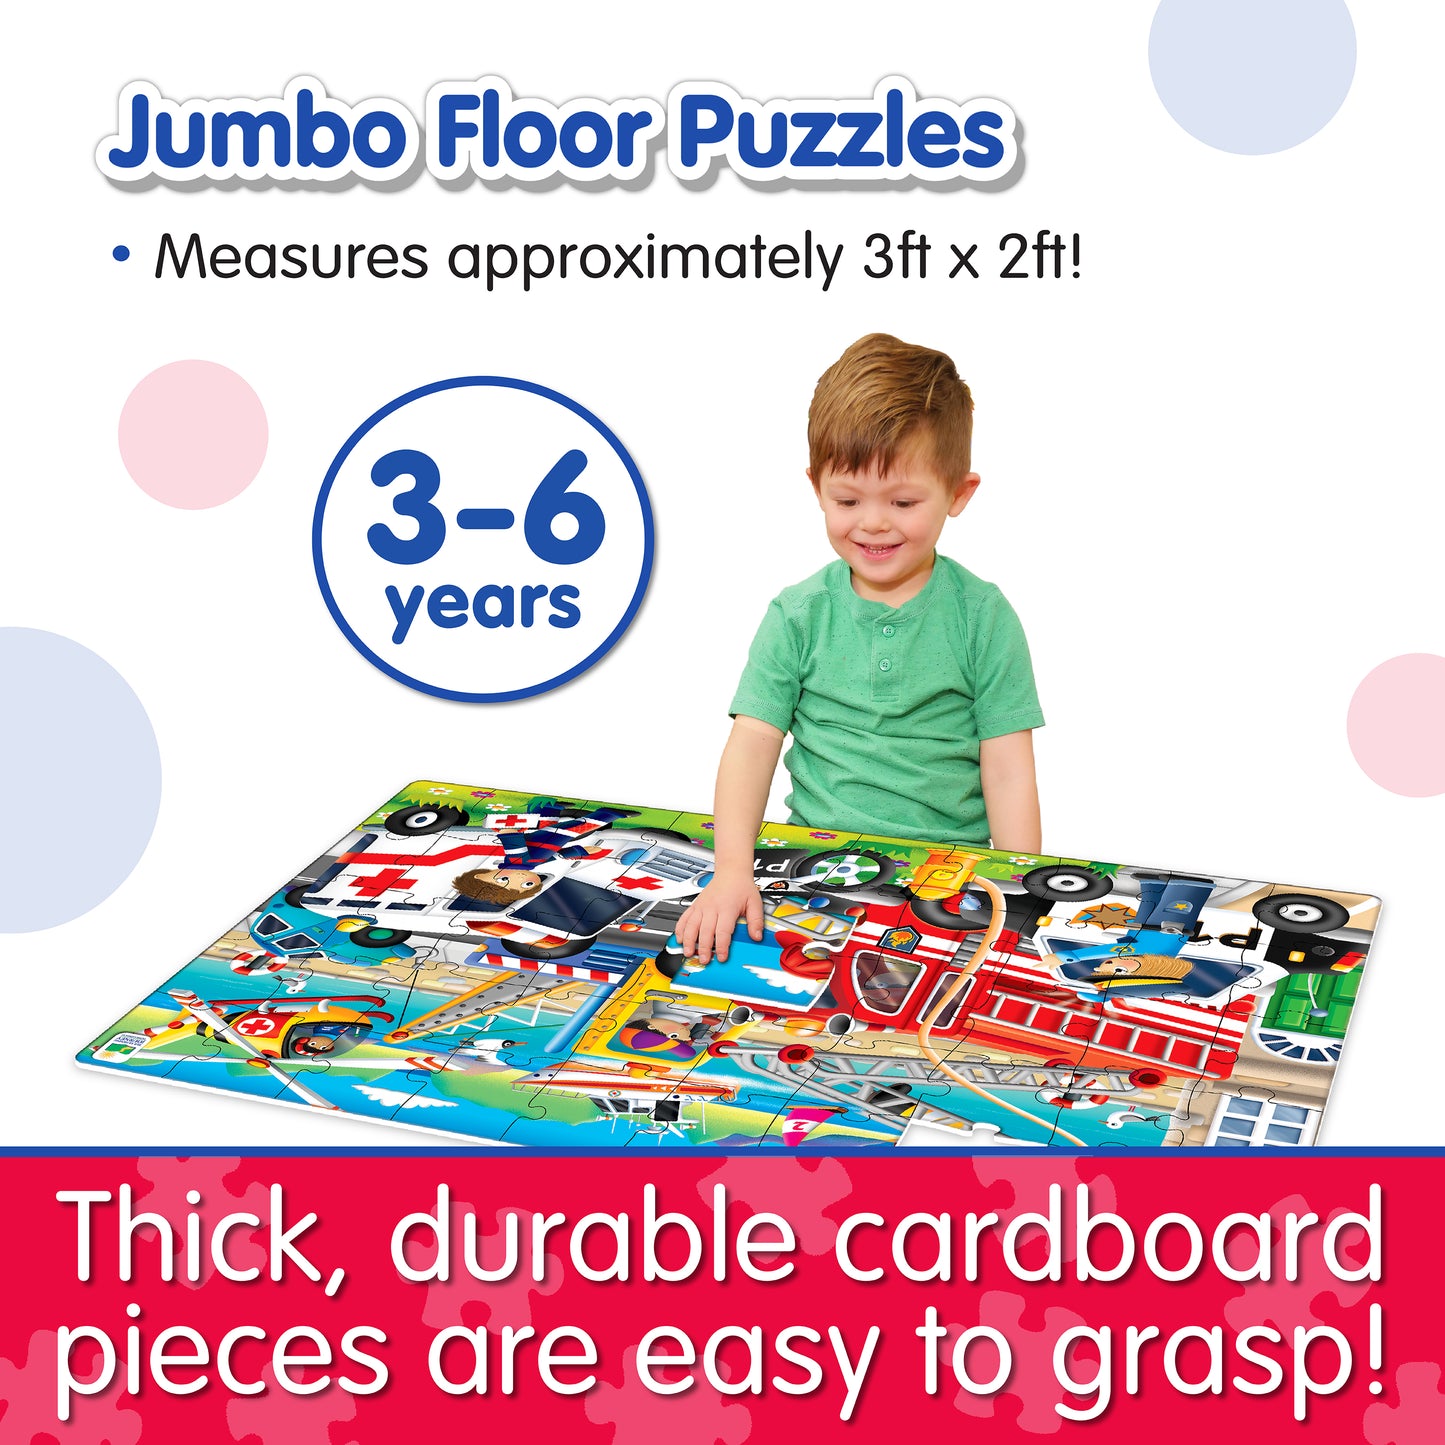 Infographic of young boy playing with Jumbo Floor Puzzle - Emergency Rescue that reads, "Thick, durable cardboard pieces are easy to grasp!"